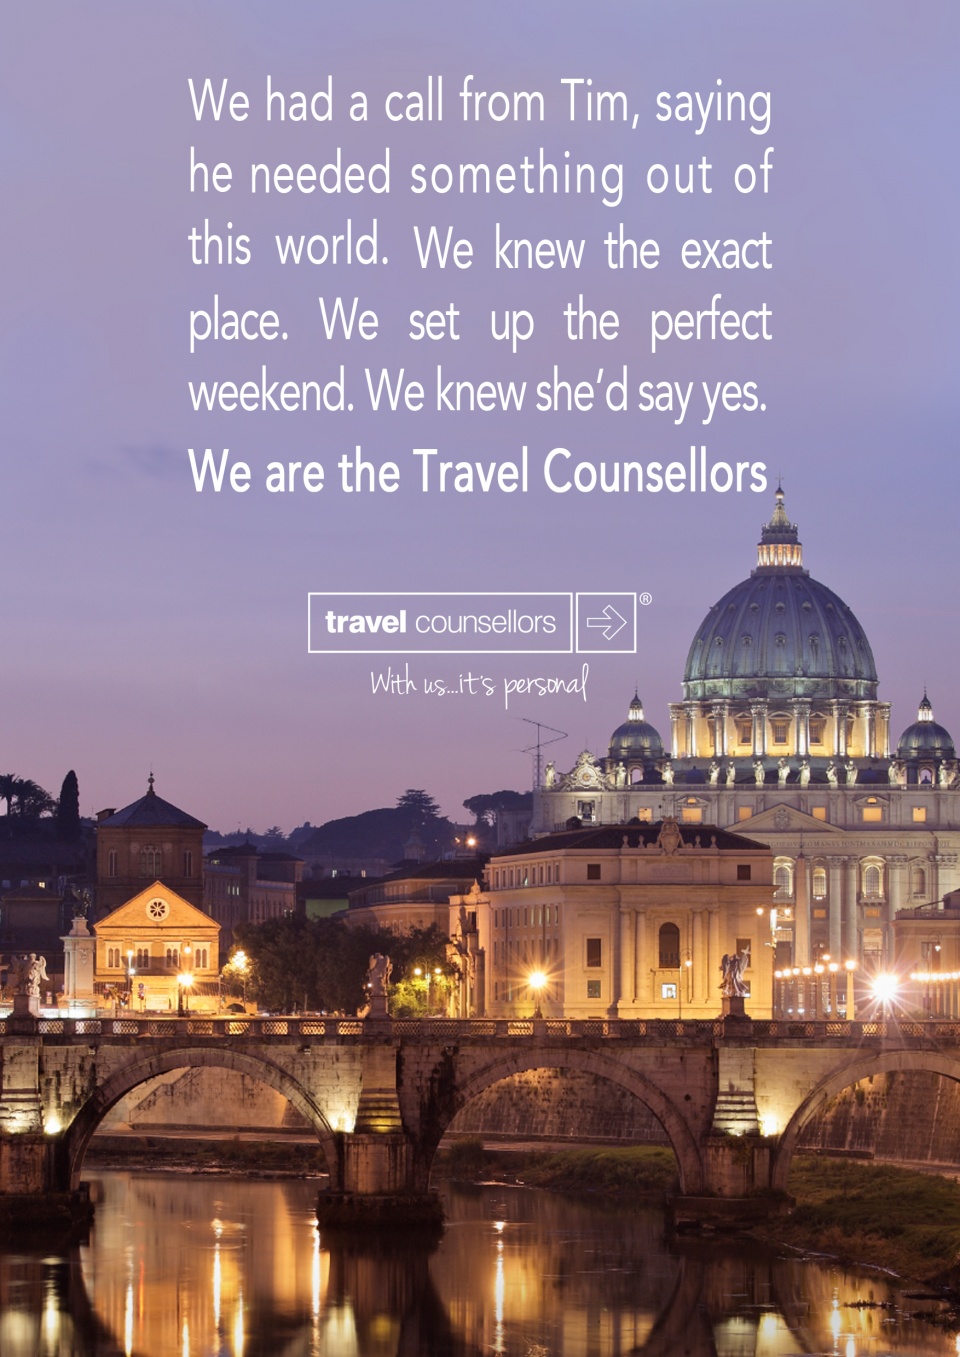 TRAVEL COUNSELLORS